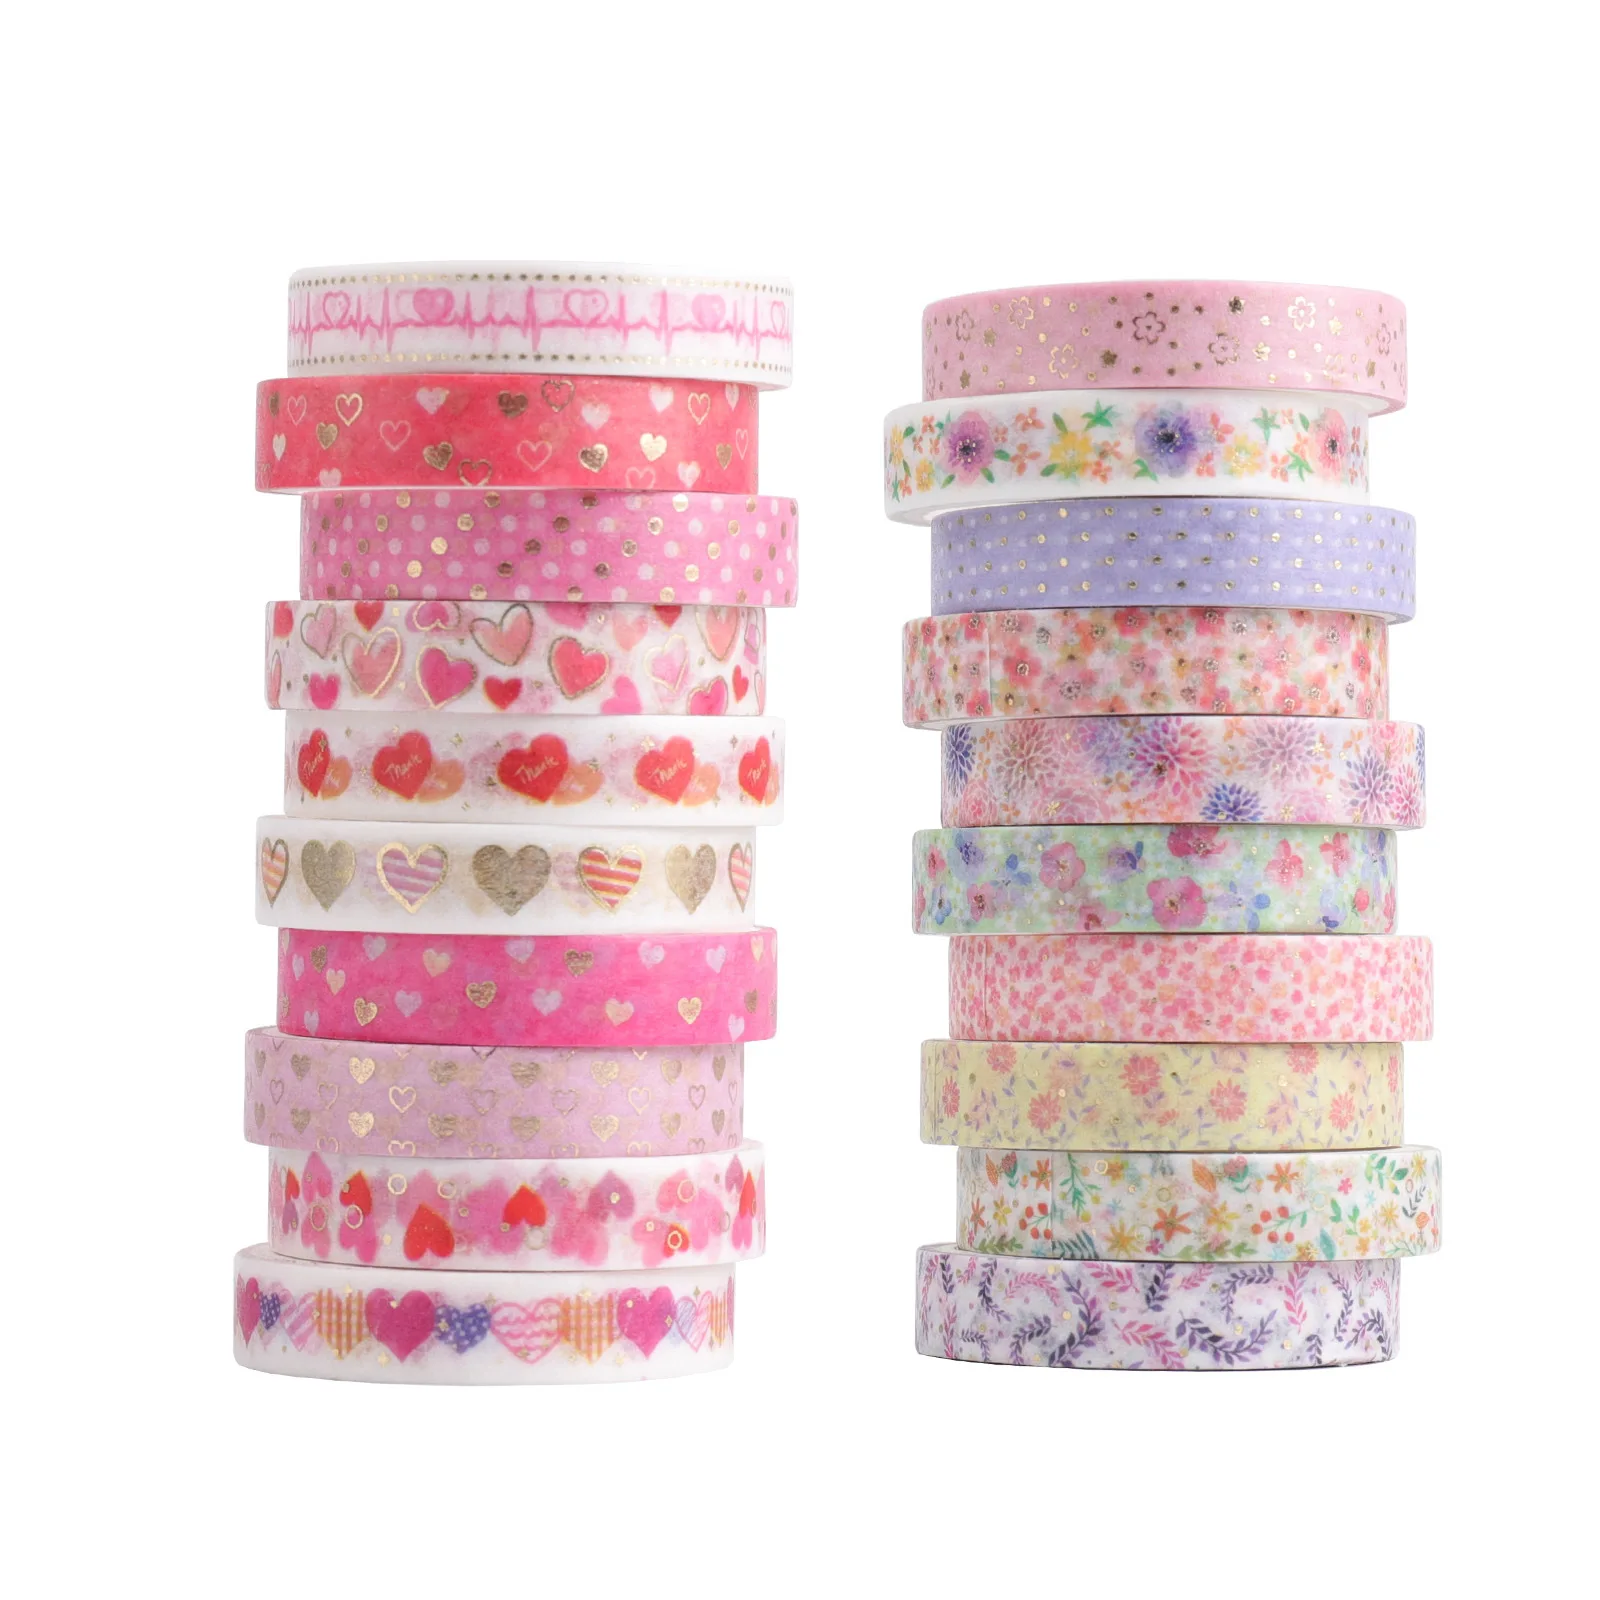 20pcs Red Heart Flower Collection Washi Tape Set 8mm Lace Love Pink Floral Adhesive Masking Tapes Gift Stickers Decoration A6076